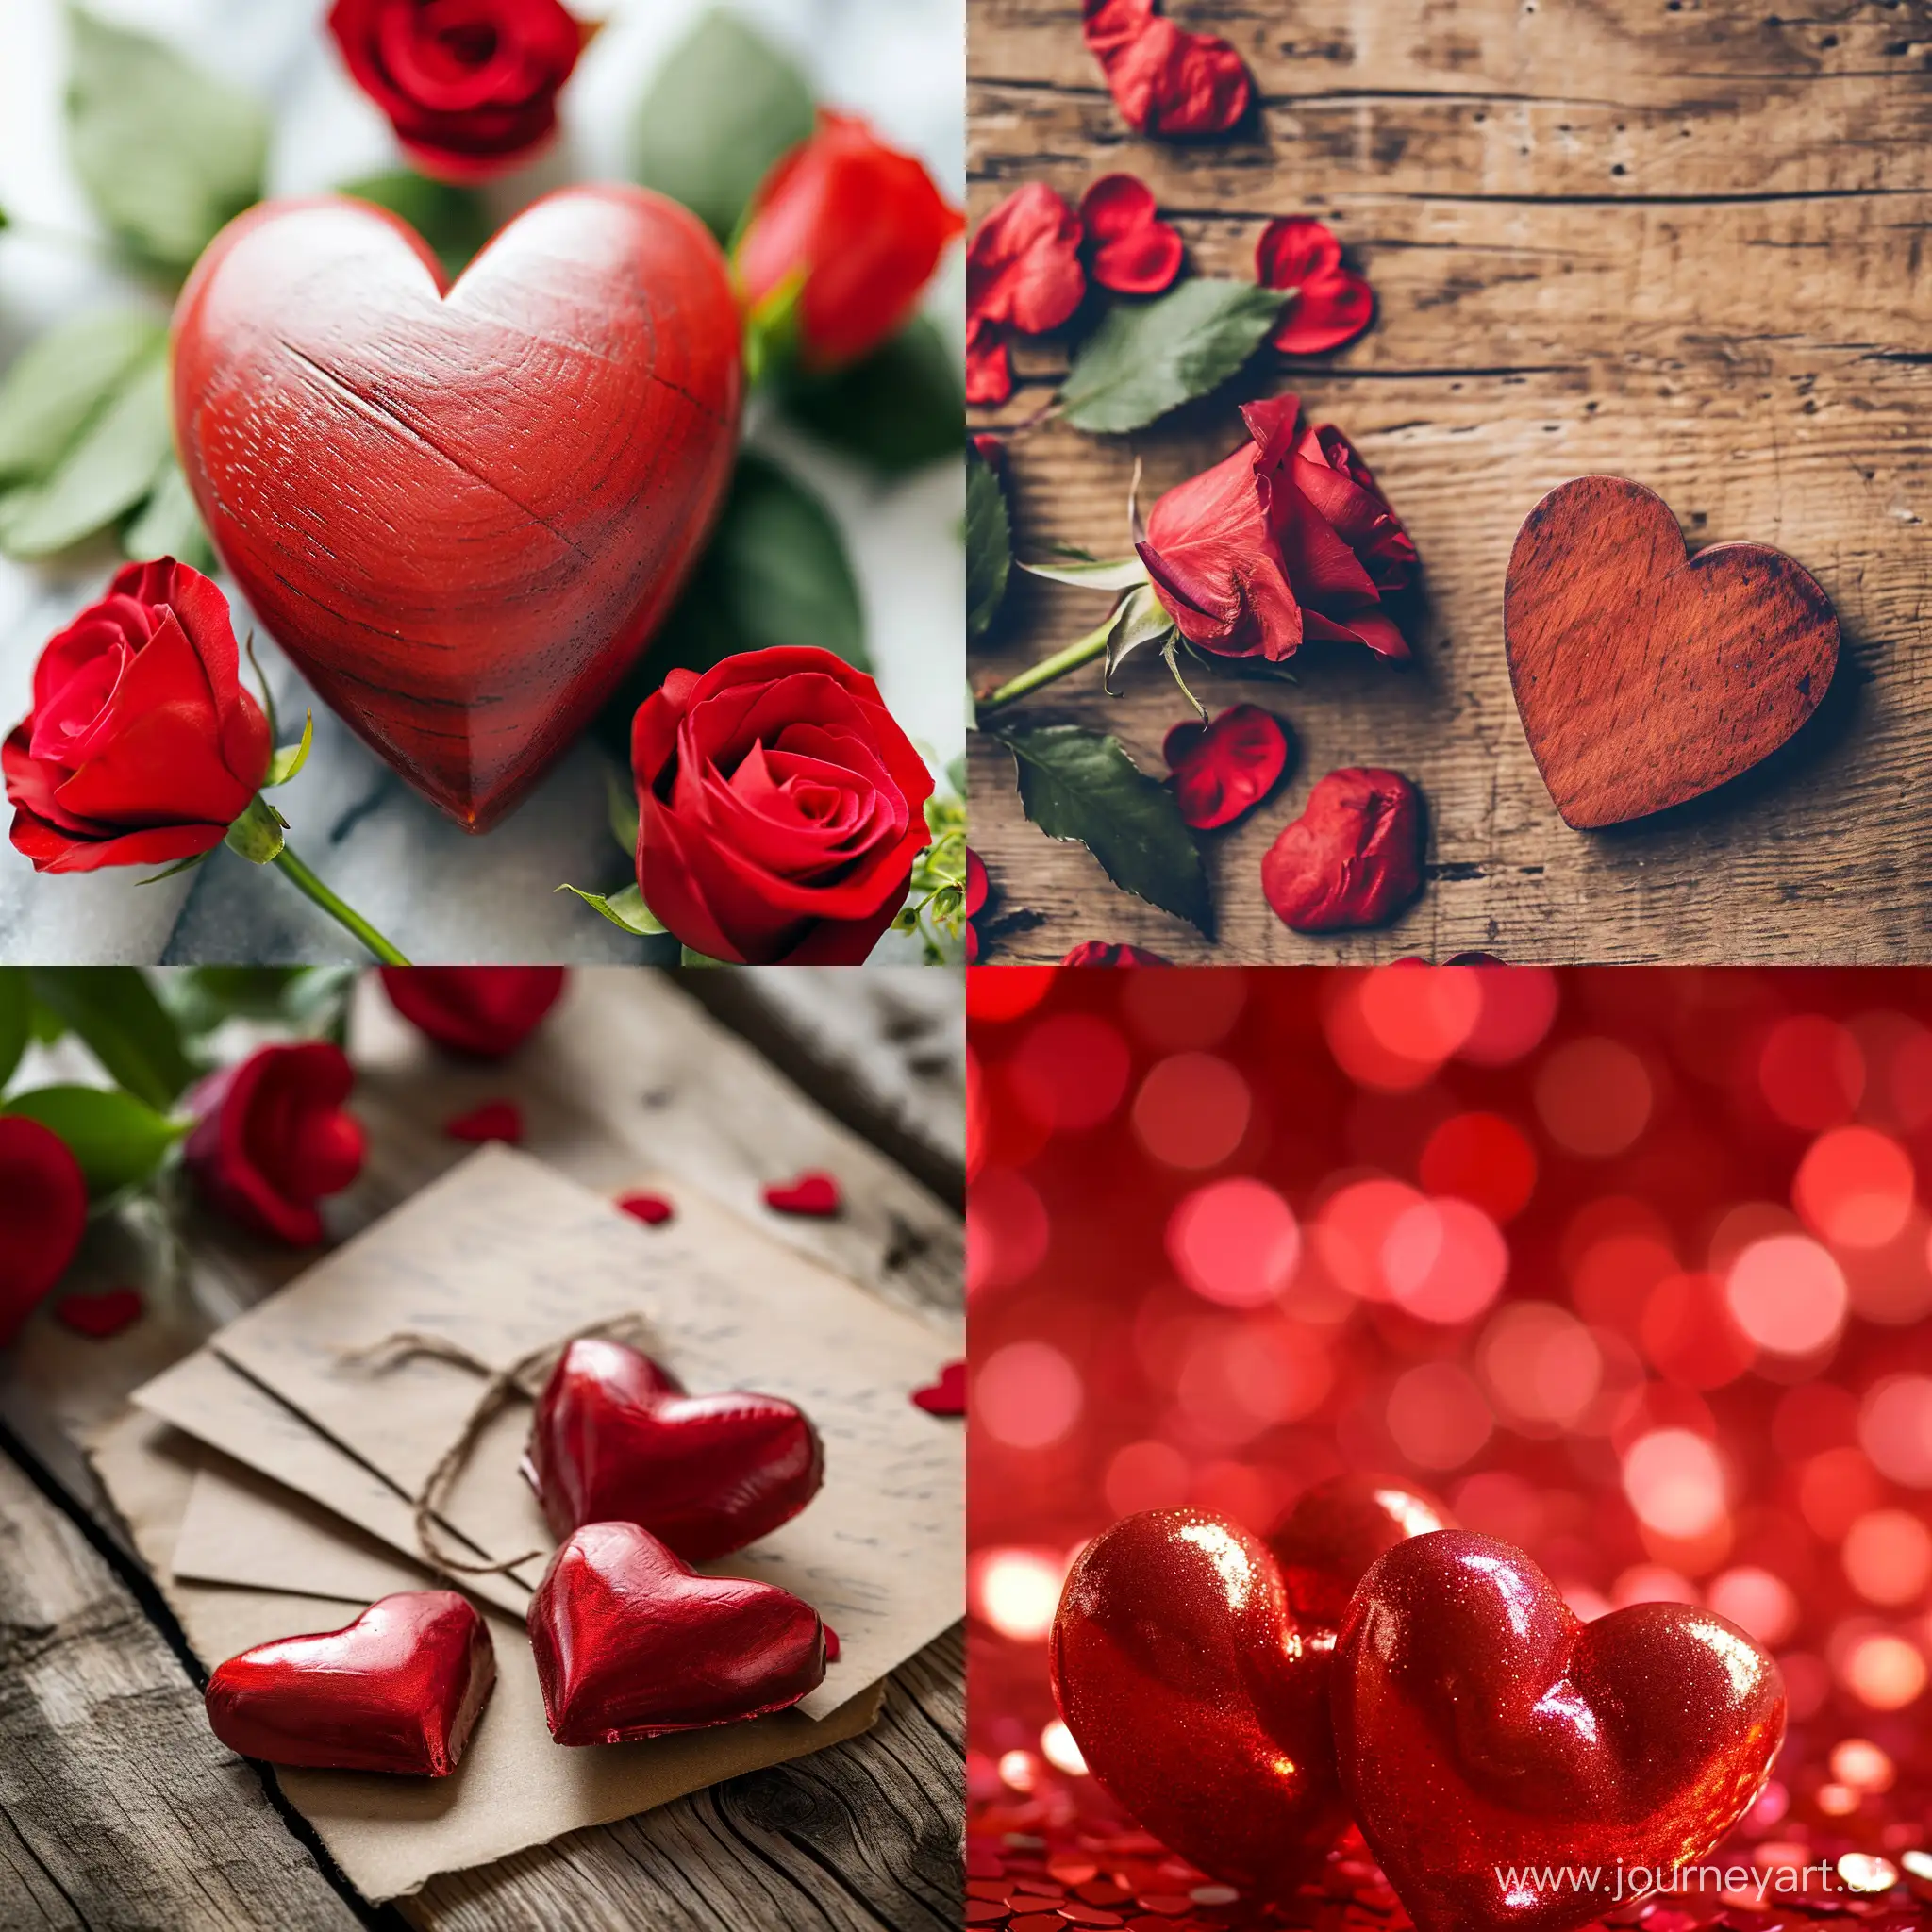 Romantic-Saint-Valentines-Day-Scene-with-Vibrant-Colors-in-Square-Format